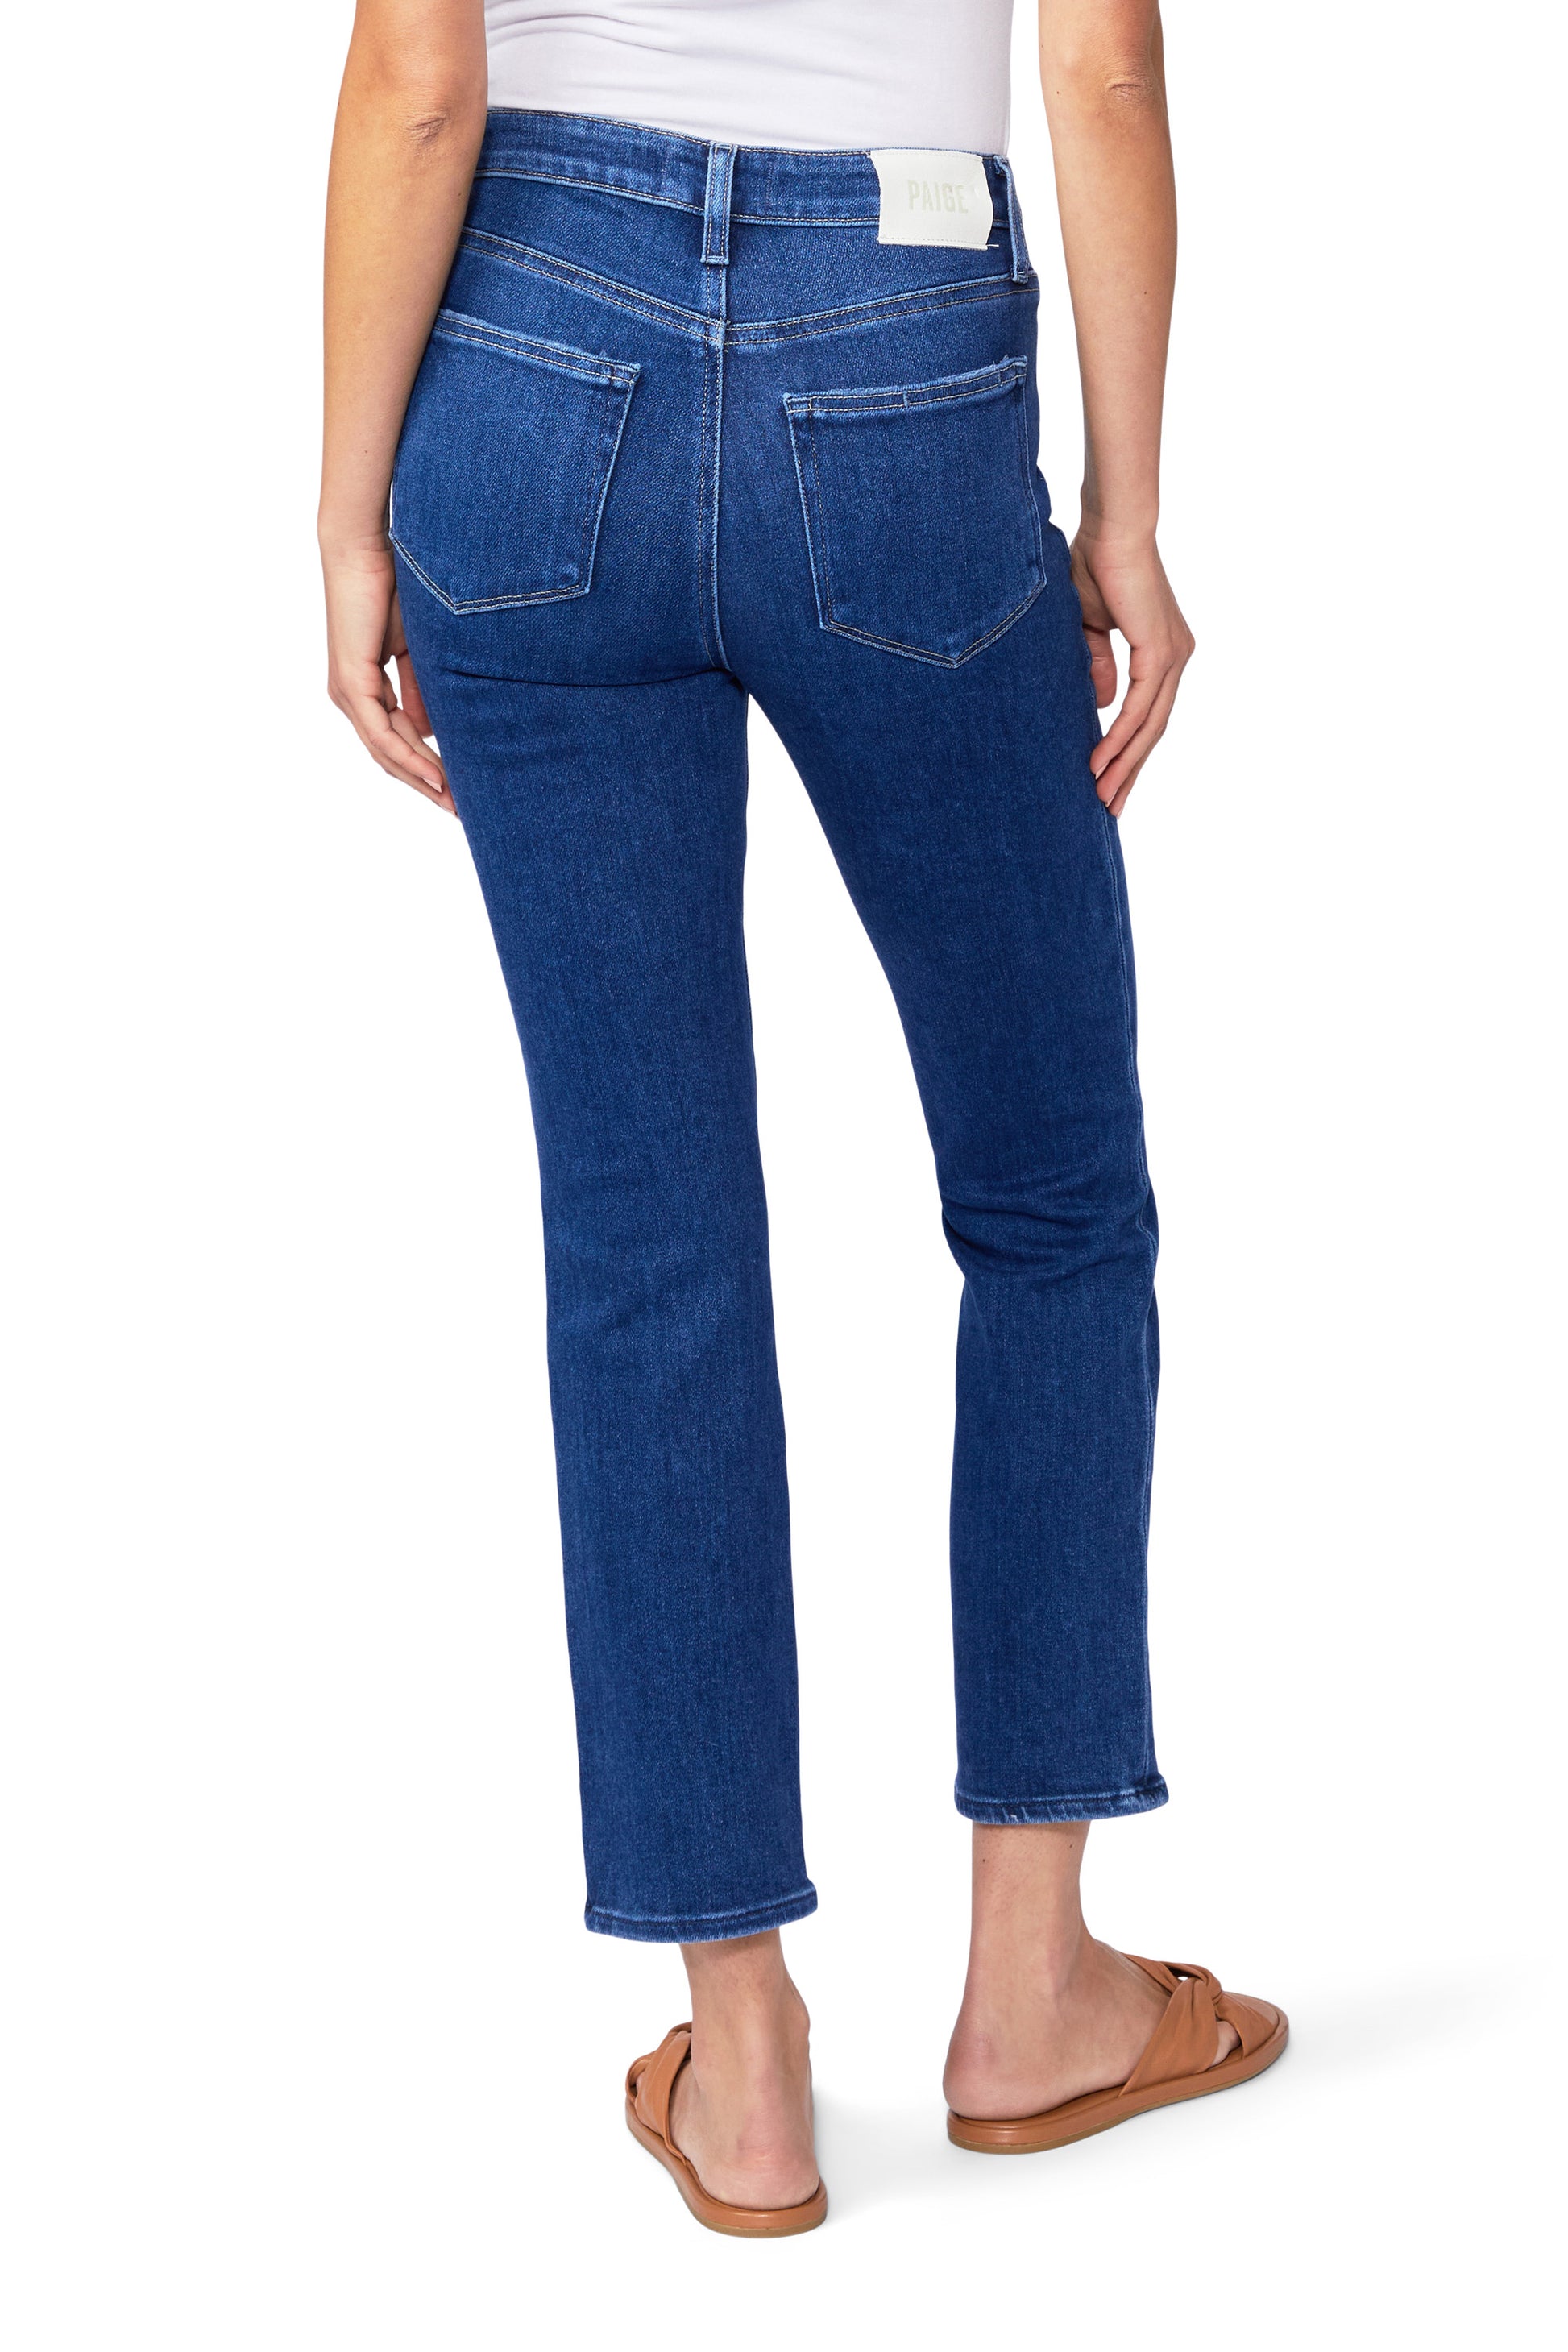 The high rise back view of a woman wearing Paige Cindy Straight Ankle - Soleil denim jeans.